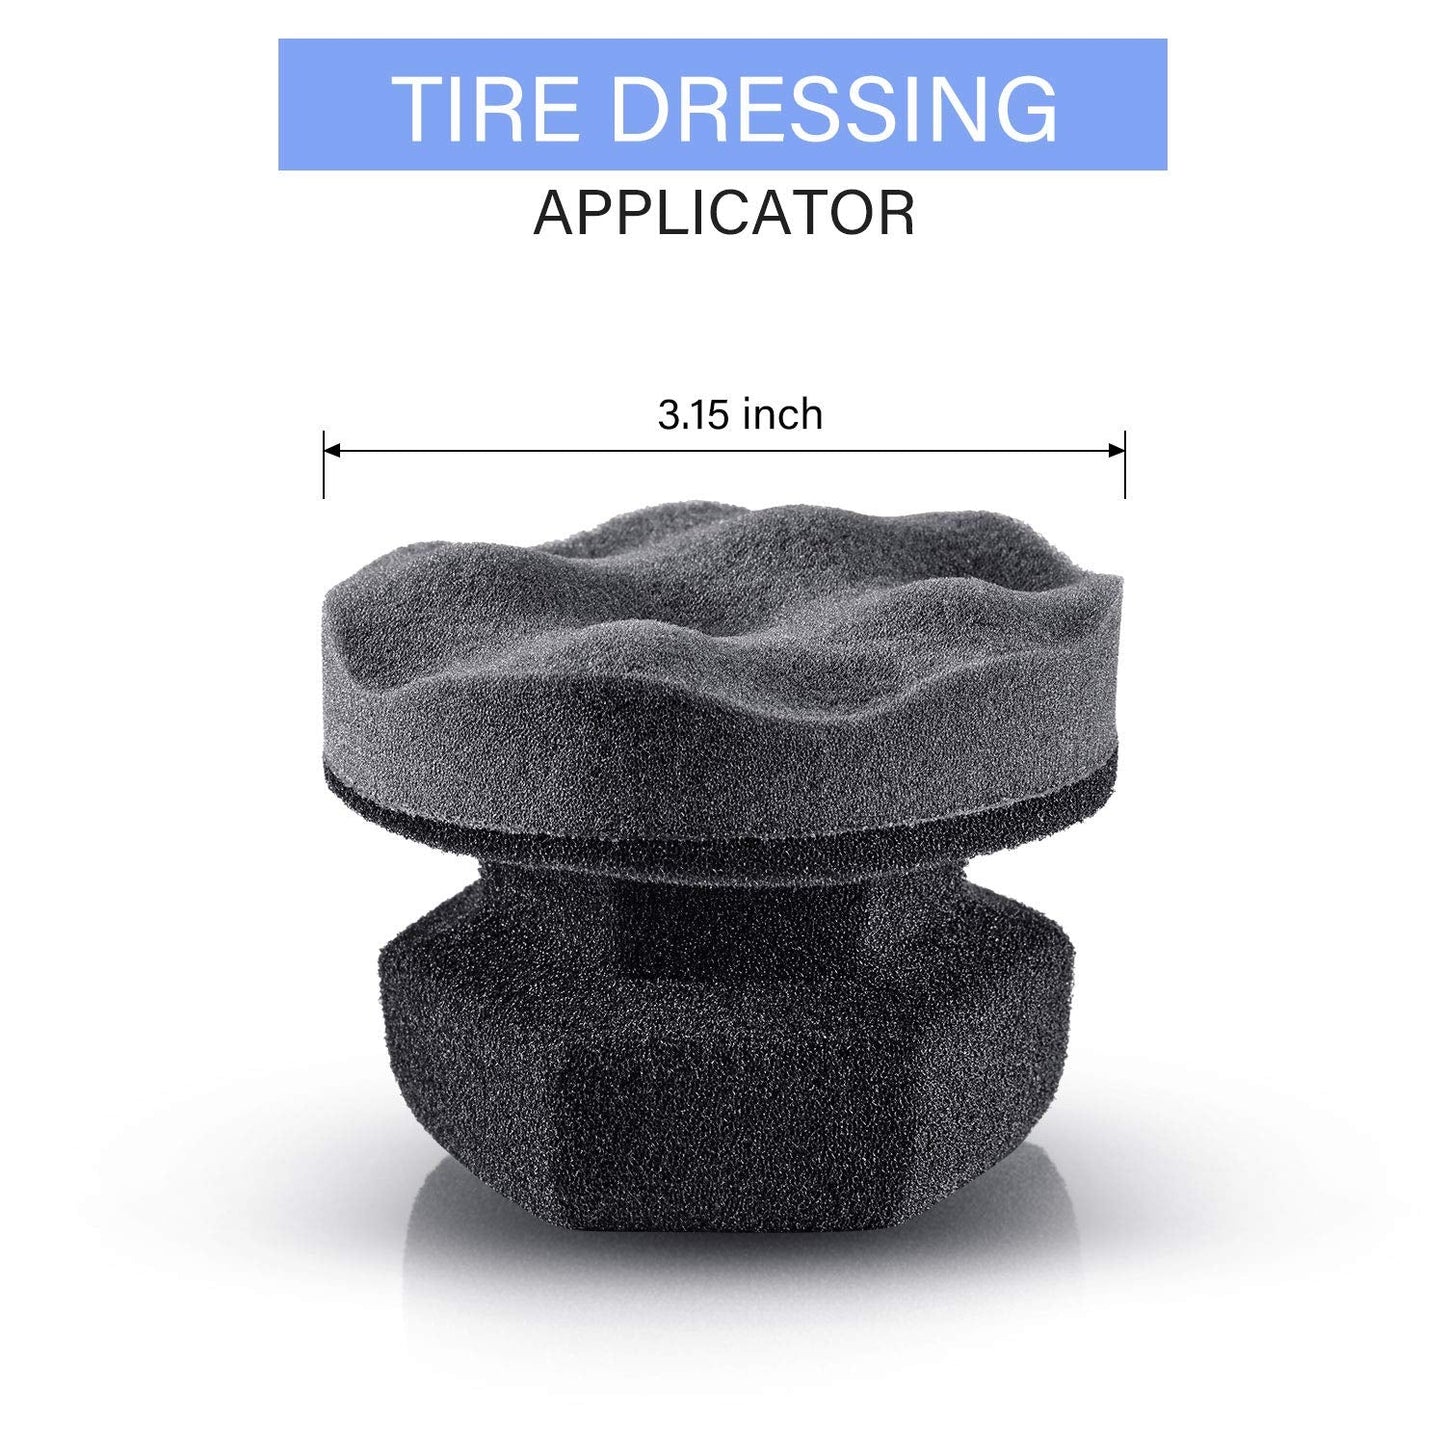 6 Pieces Tire Hex Grip Dressing Applicator Washable Tire Shine